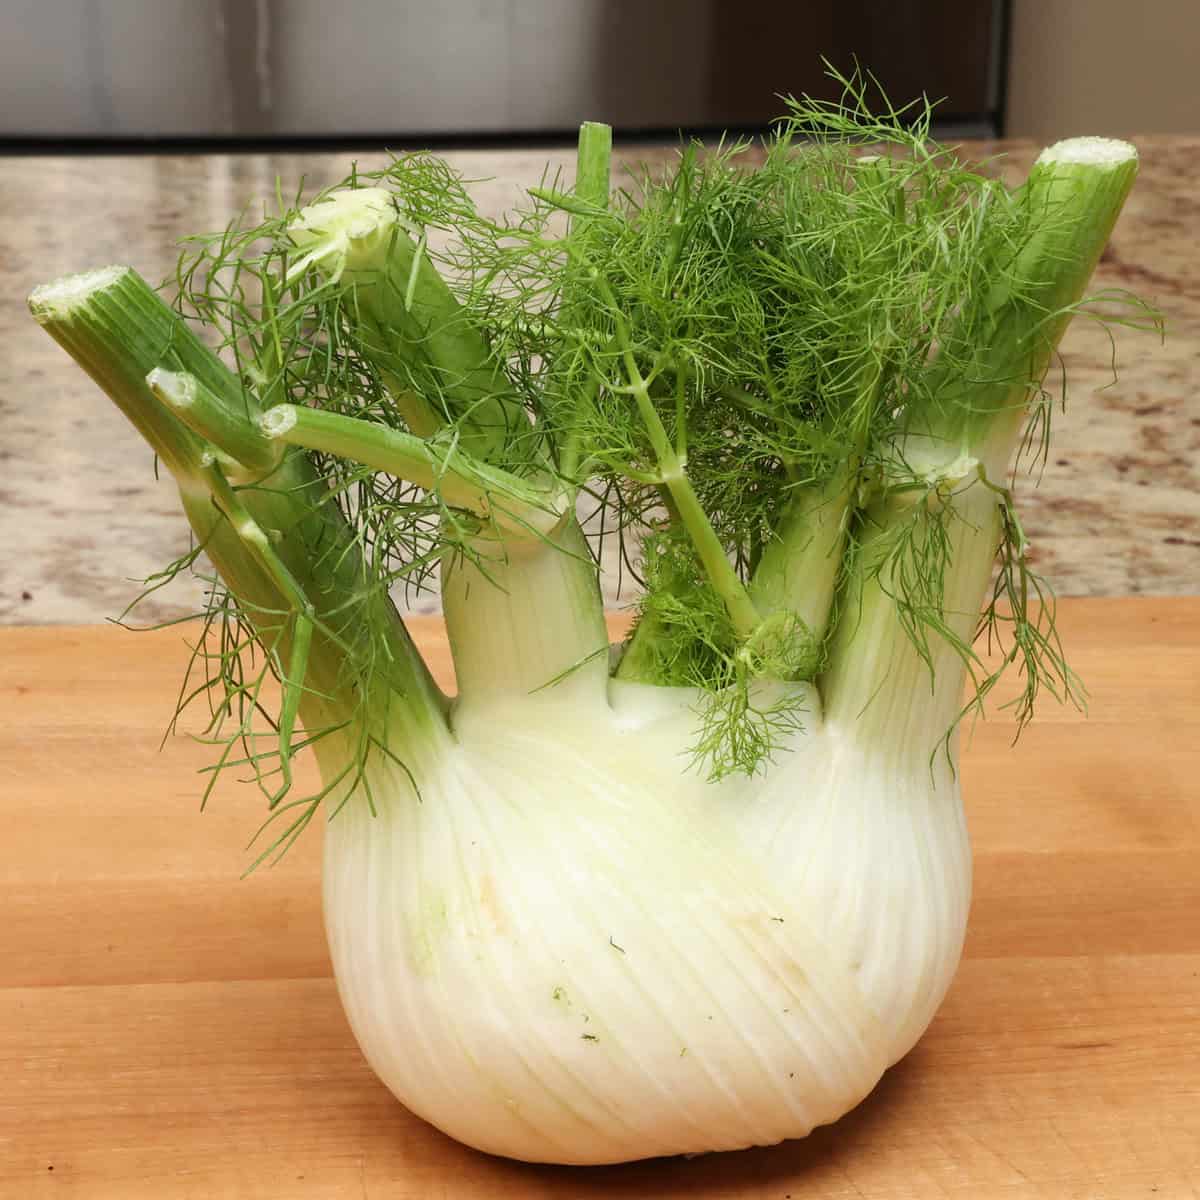 fennel on a kitchen counter.